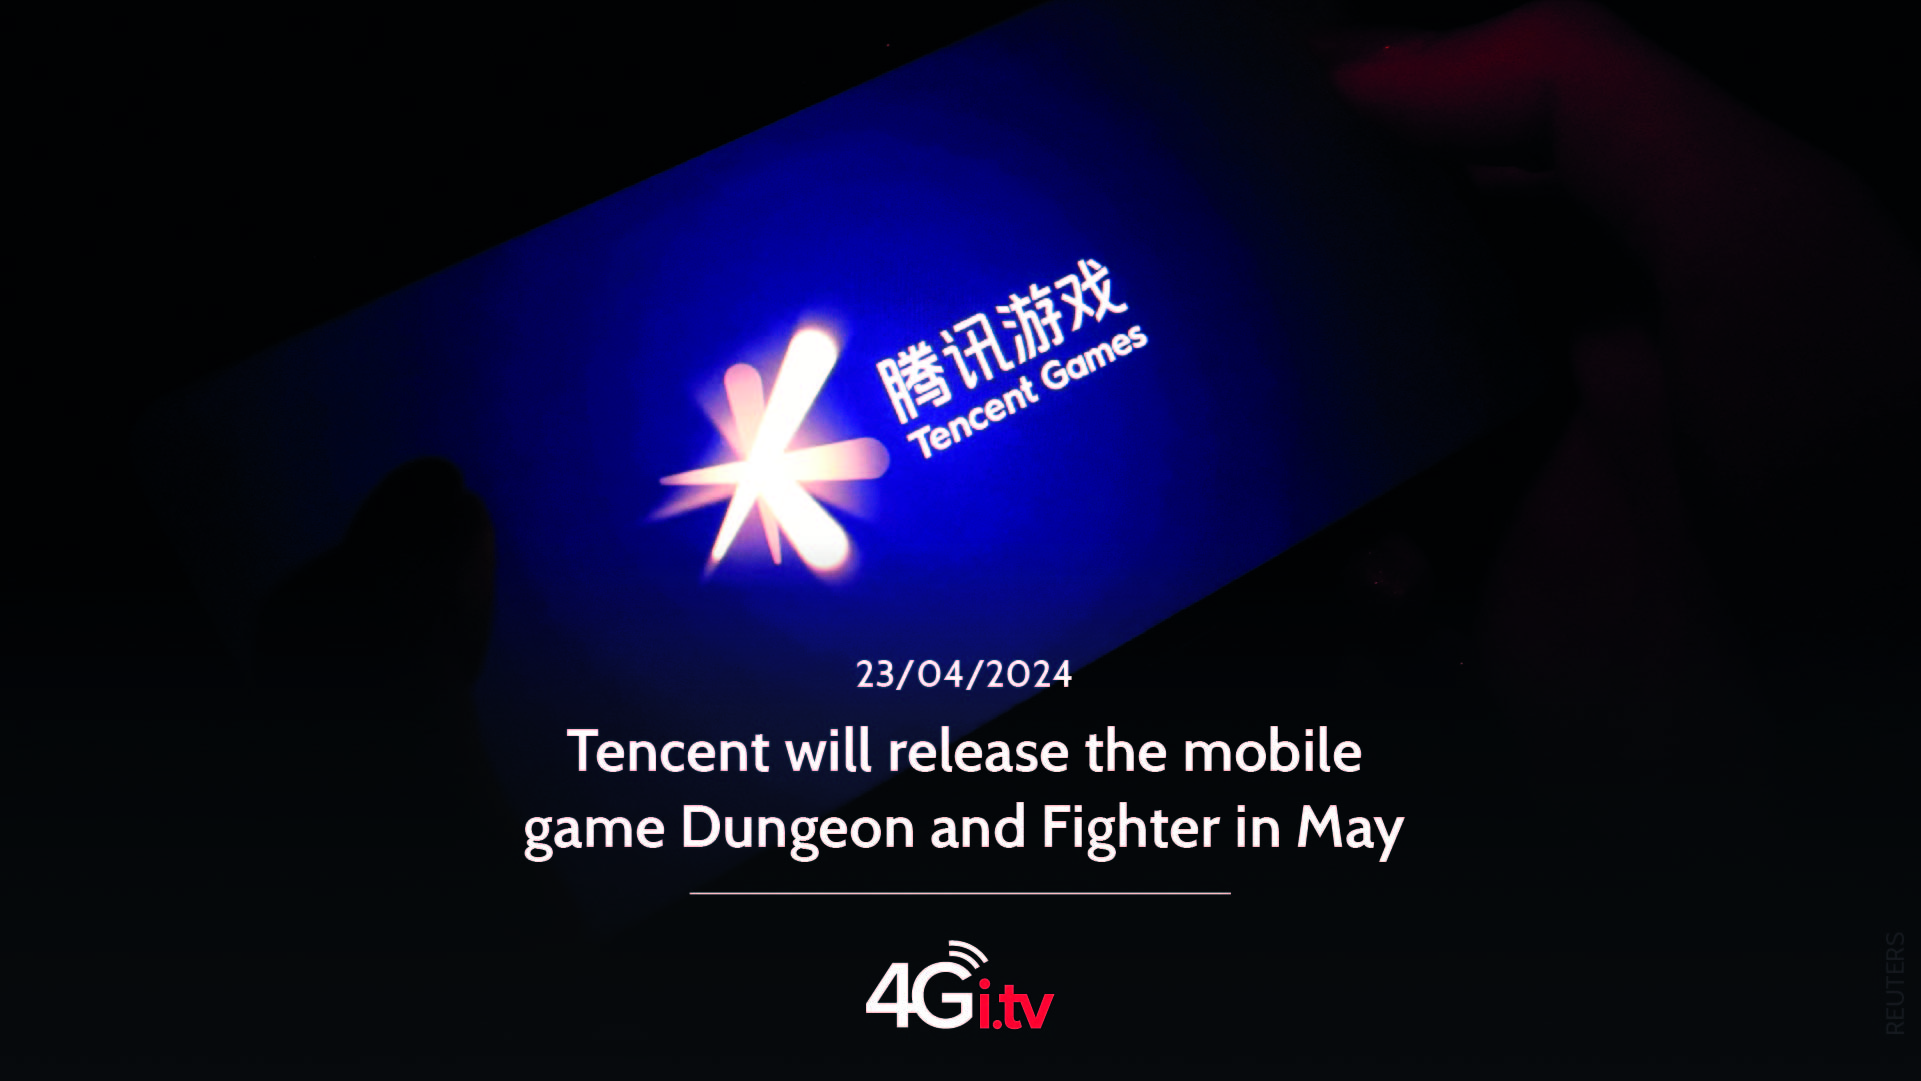 Lesen Sie mehr über den Artikel Tencent will release the mobile game Dungeon and Fighter in May